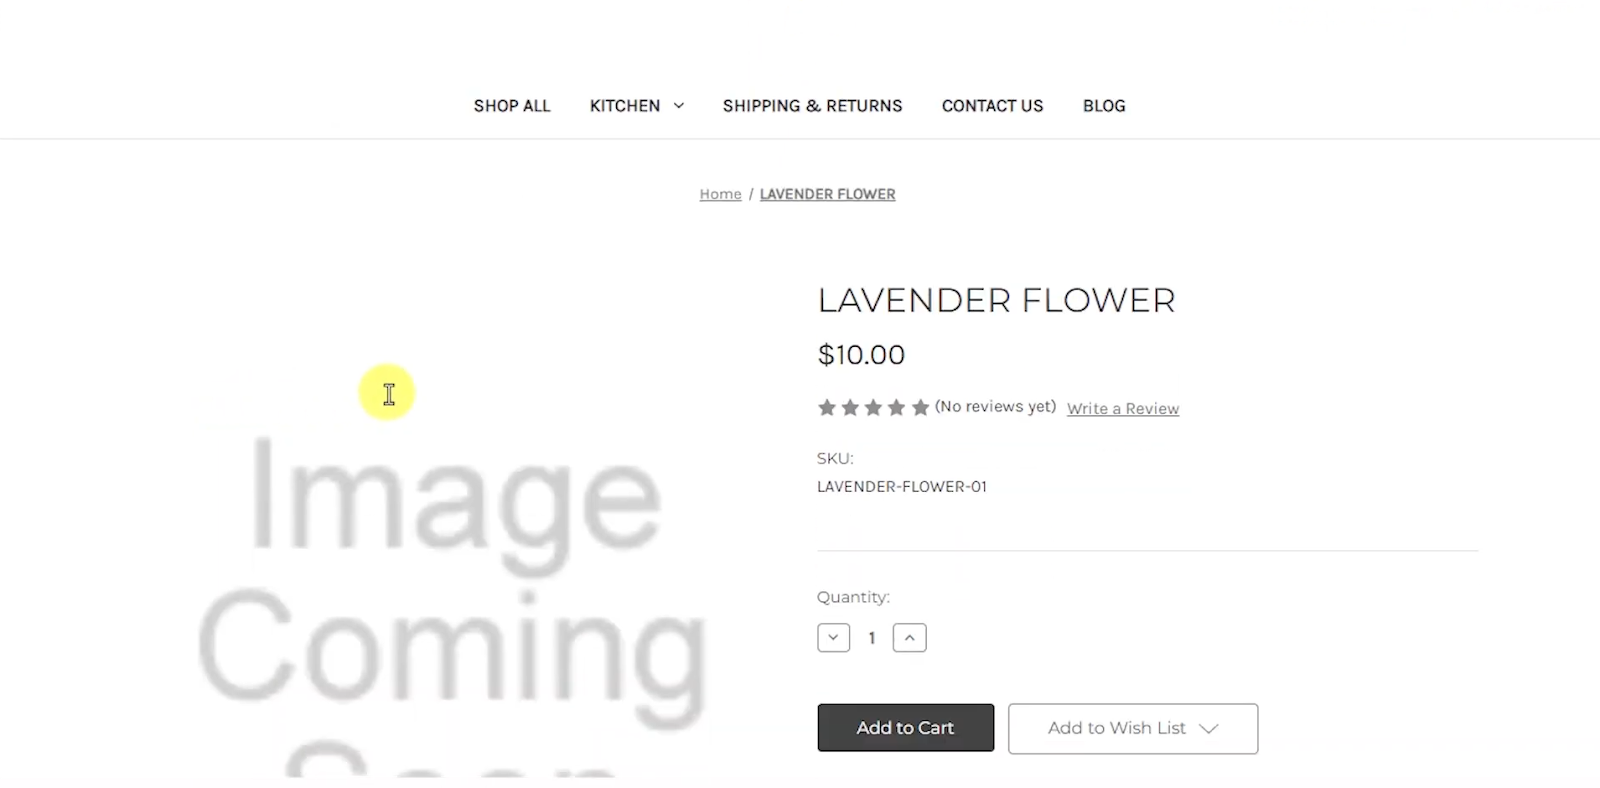 Check the new product on the BigCommerce system